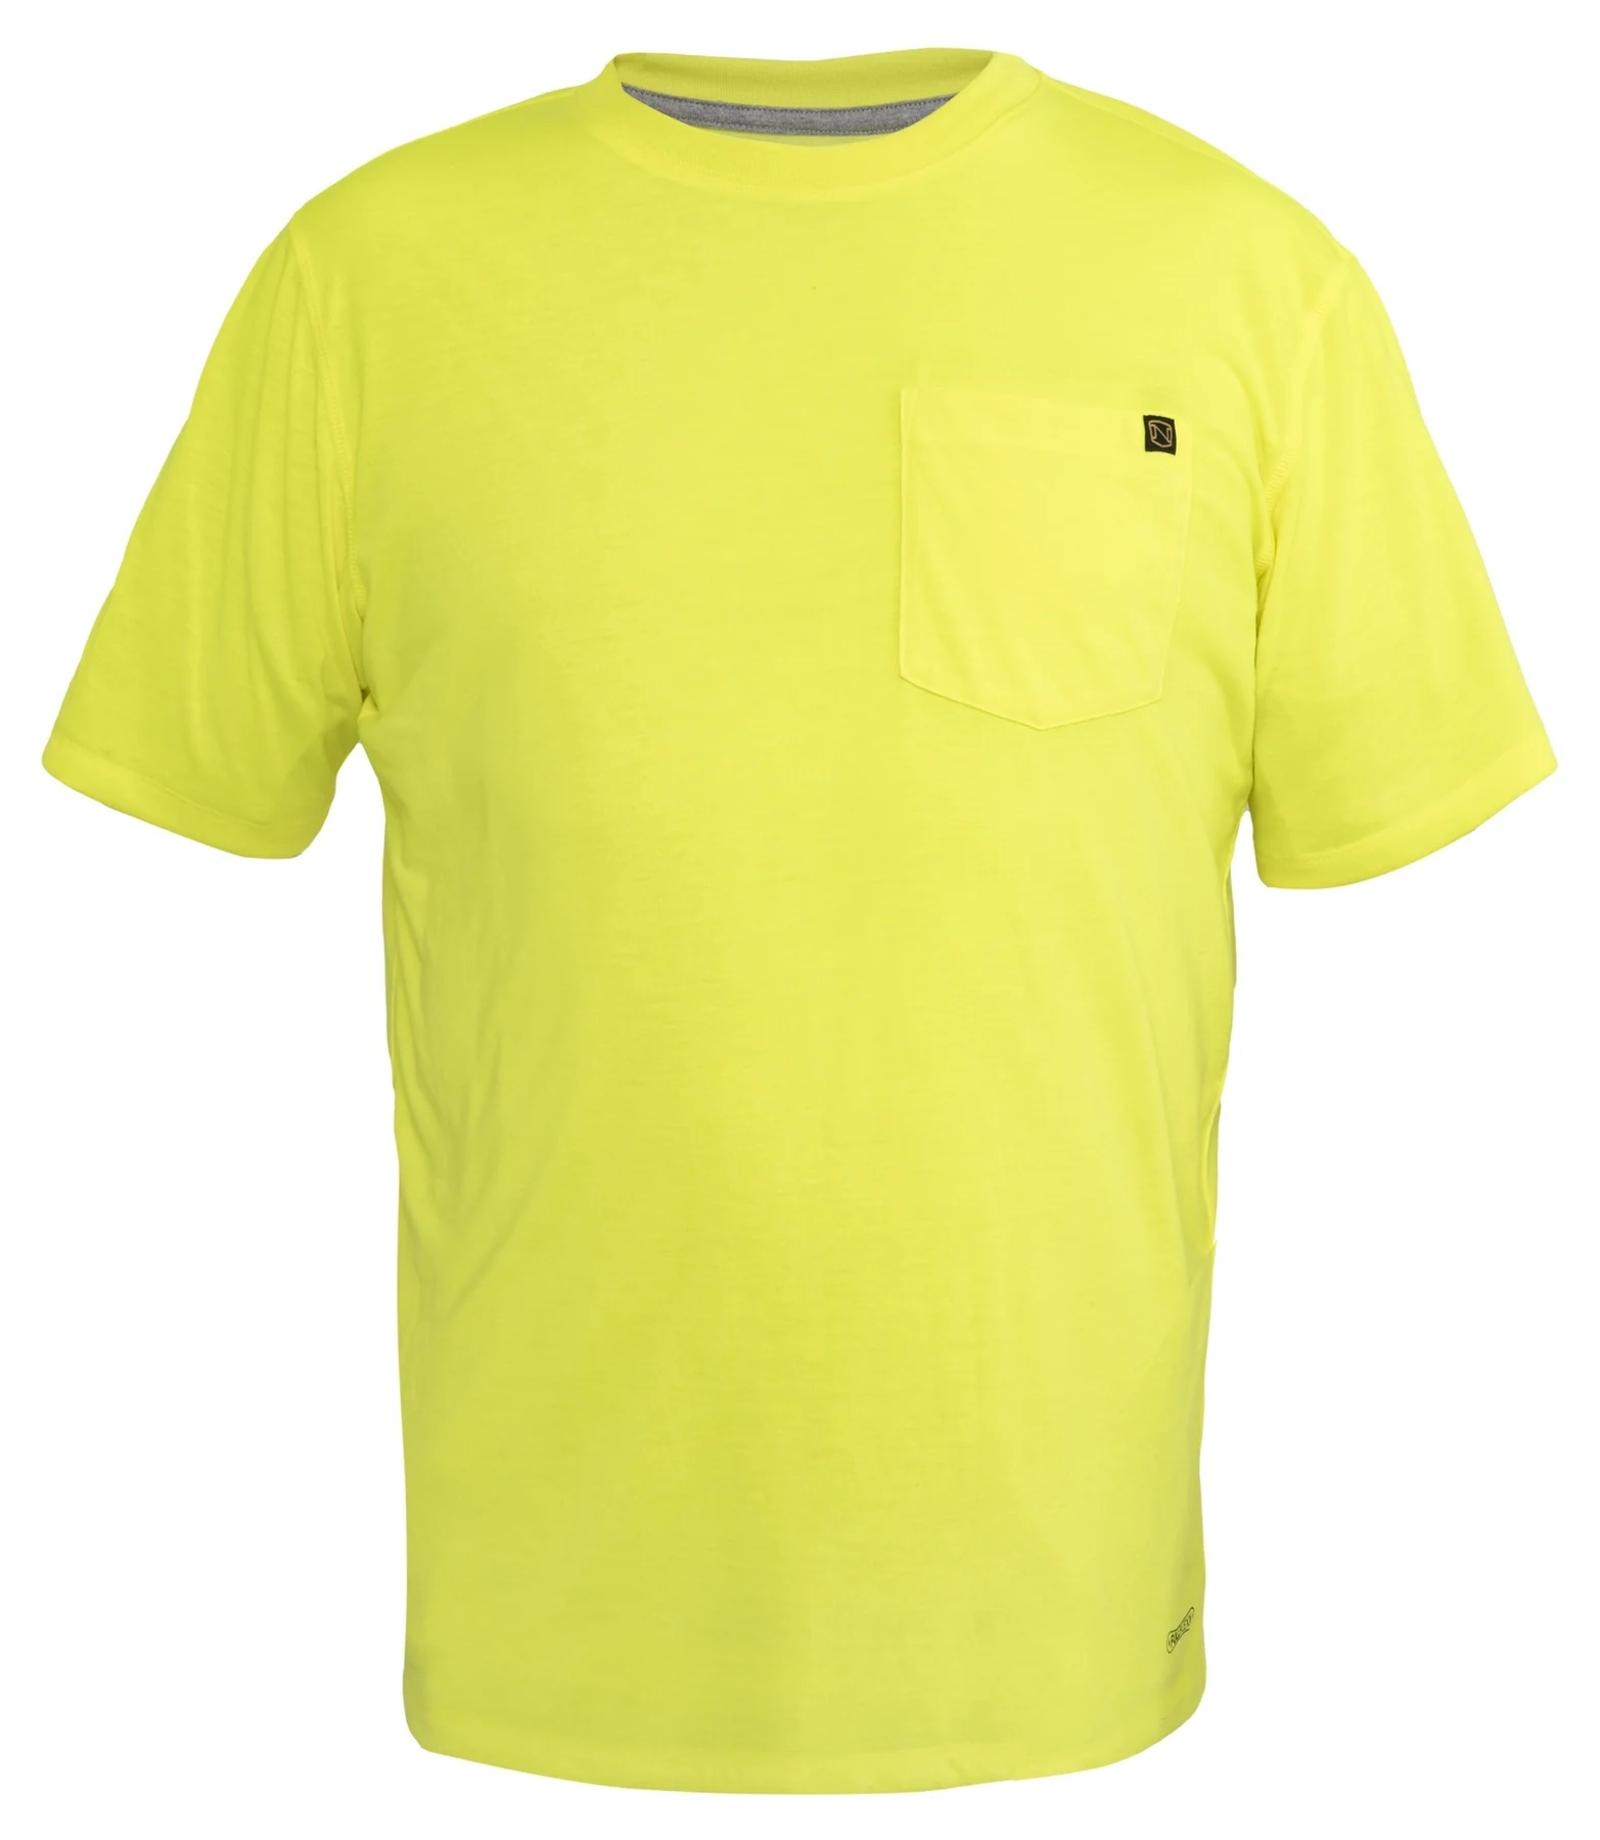 Safety Yellow front